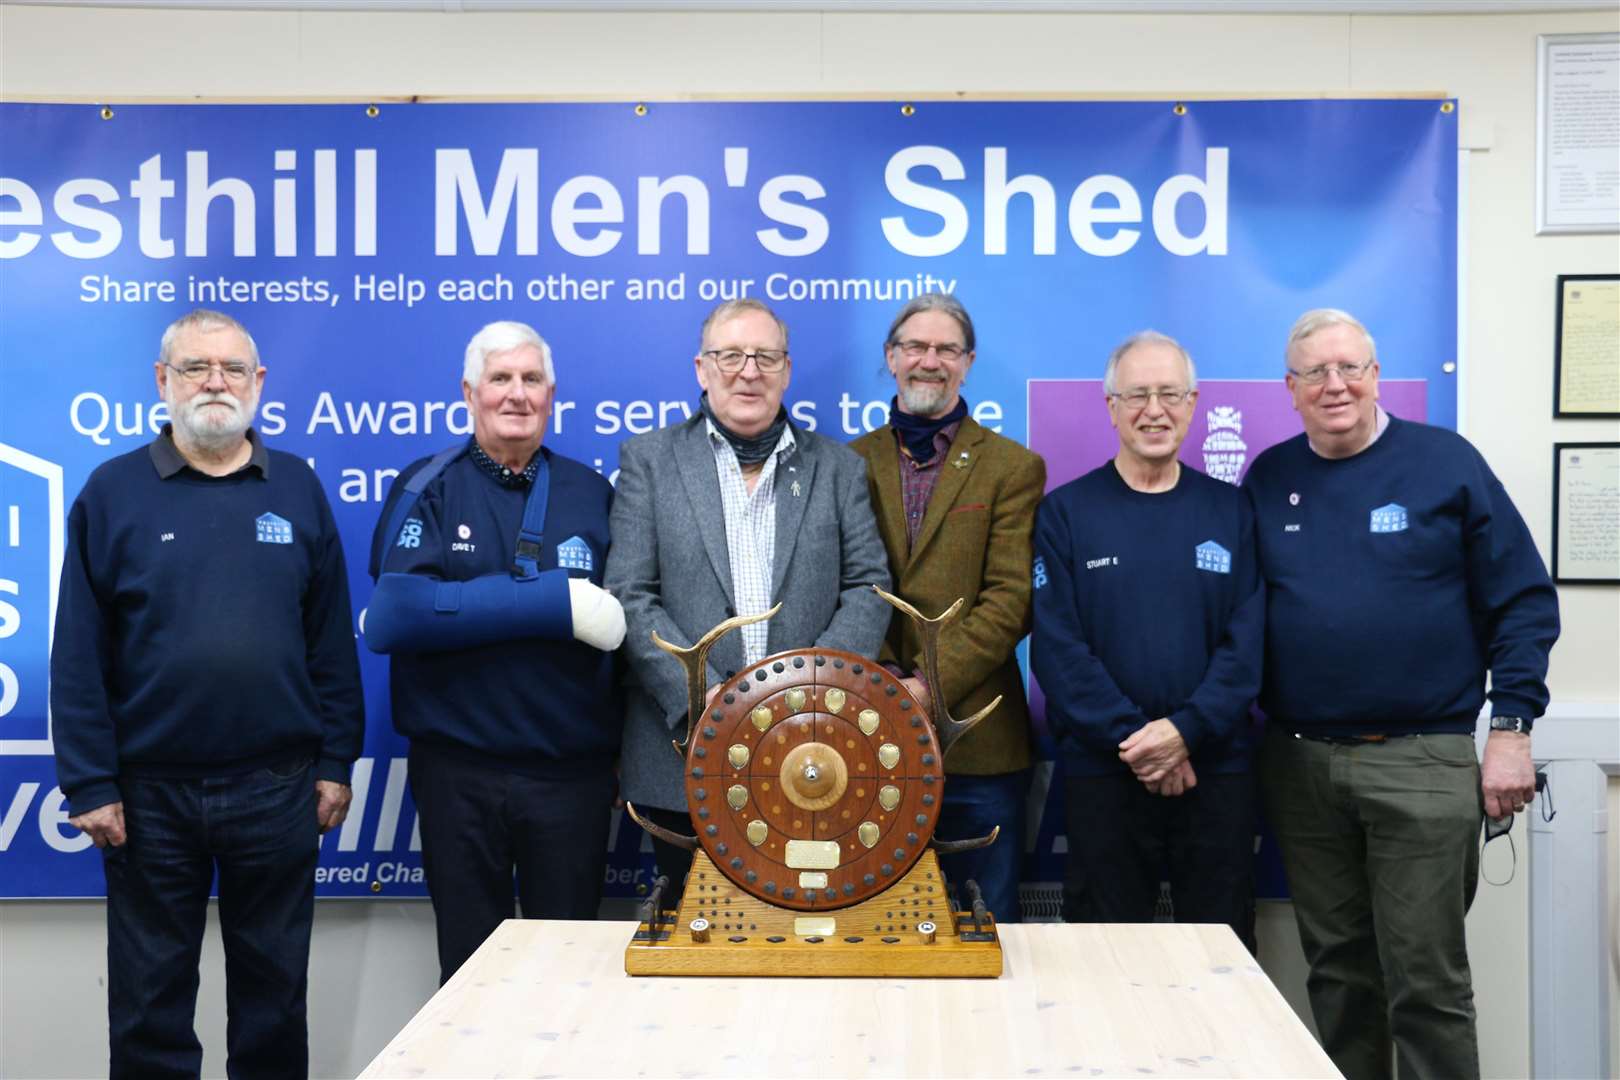 The trophy was presented to Westhill and District Men's Shed.